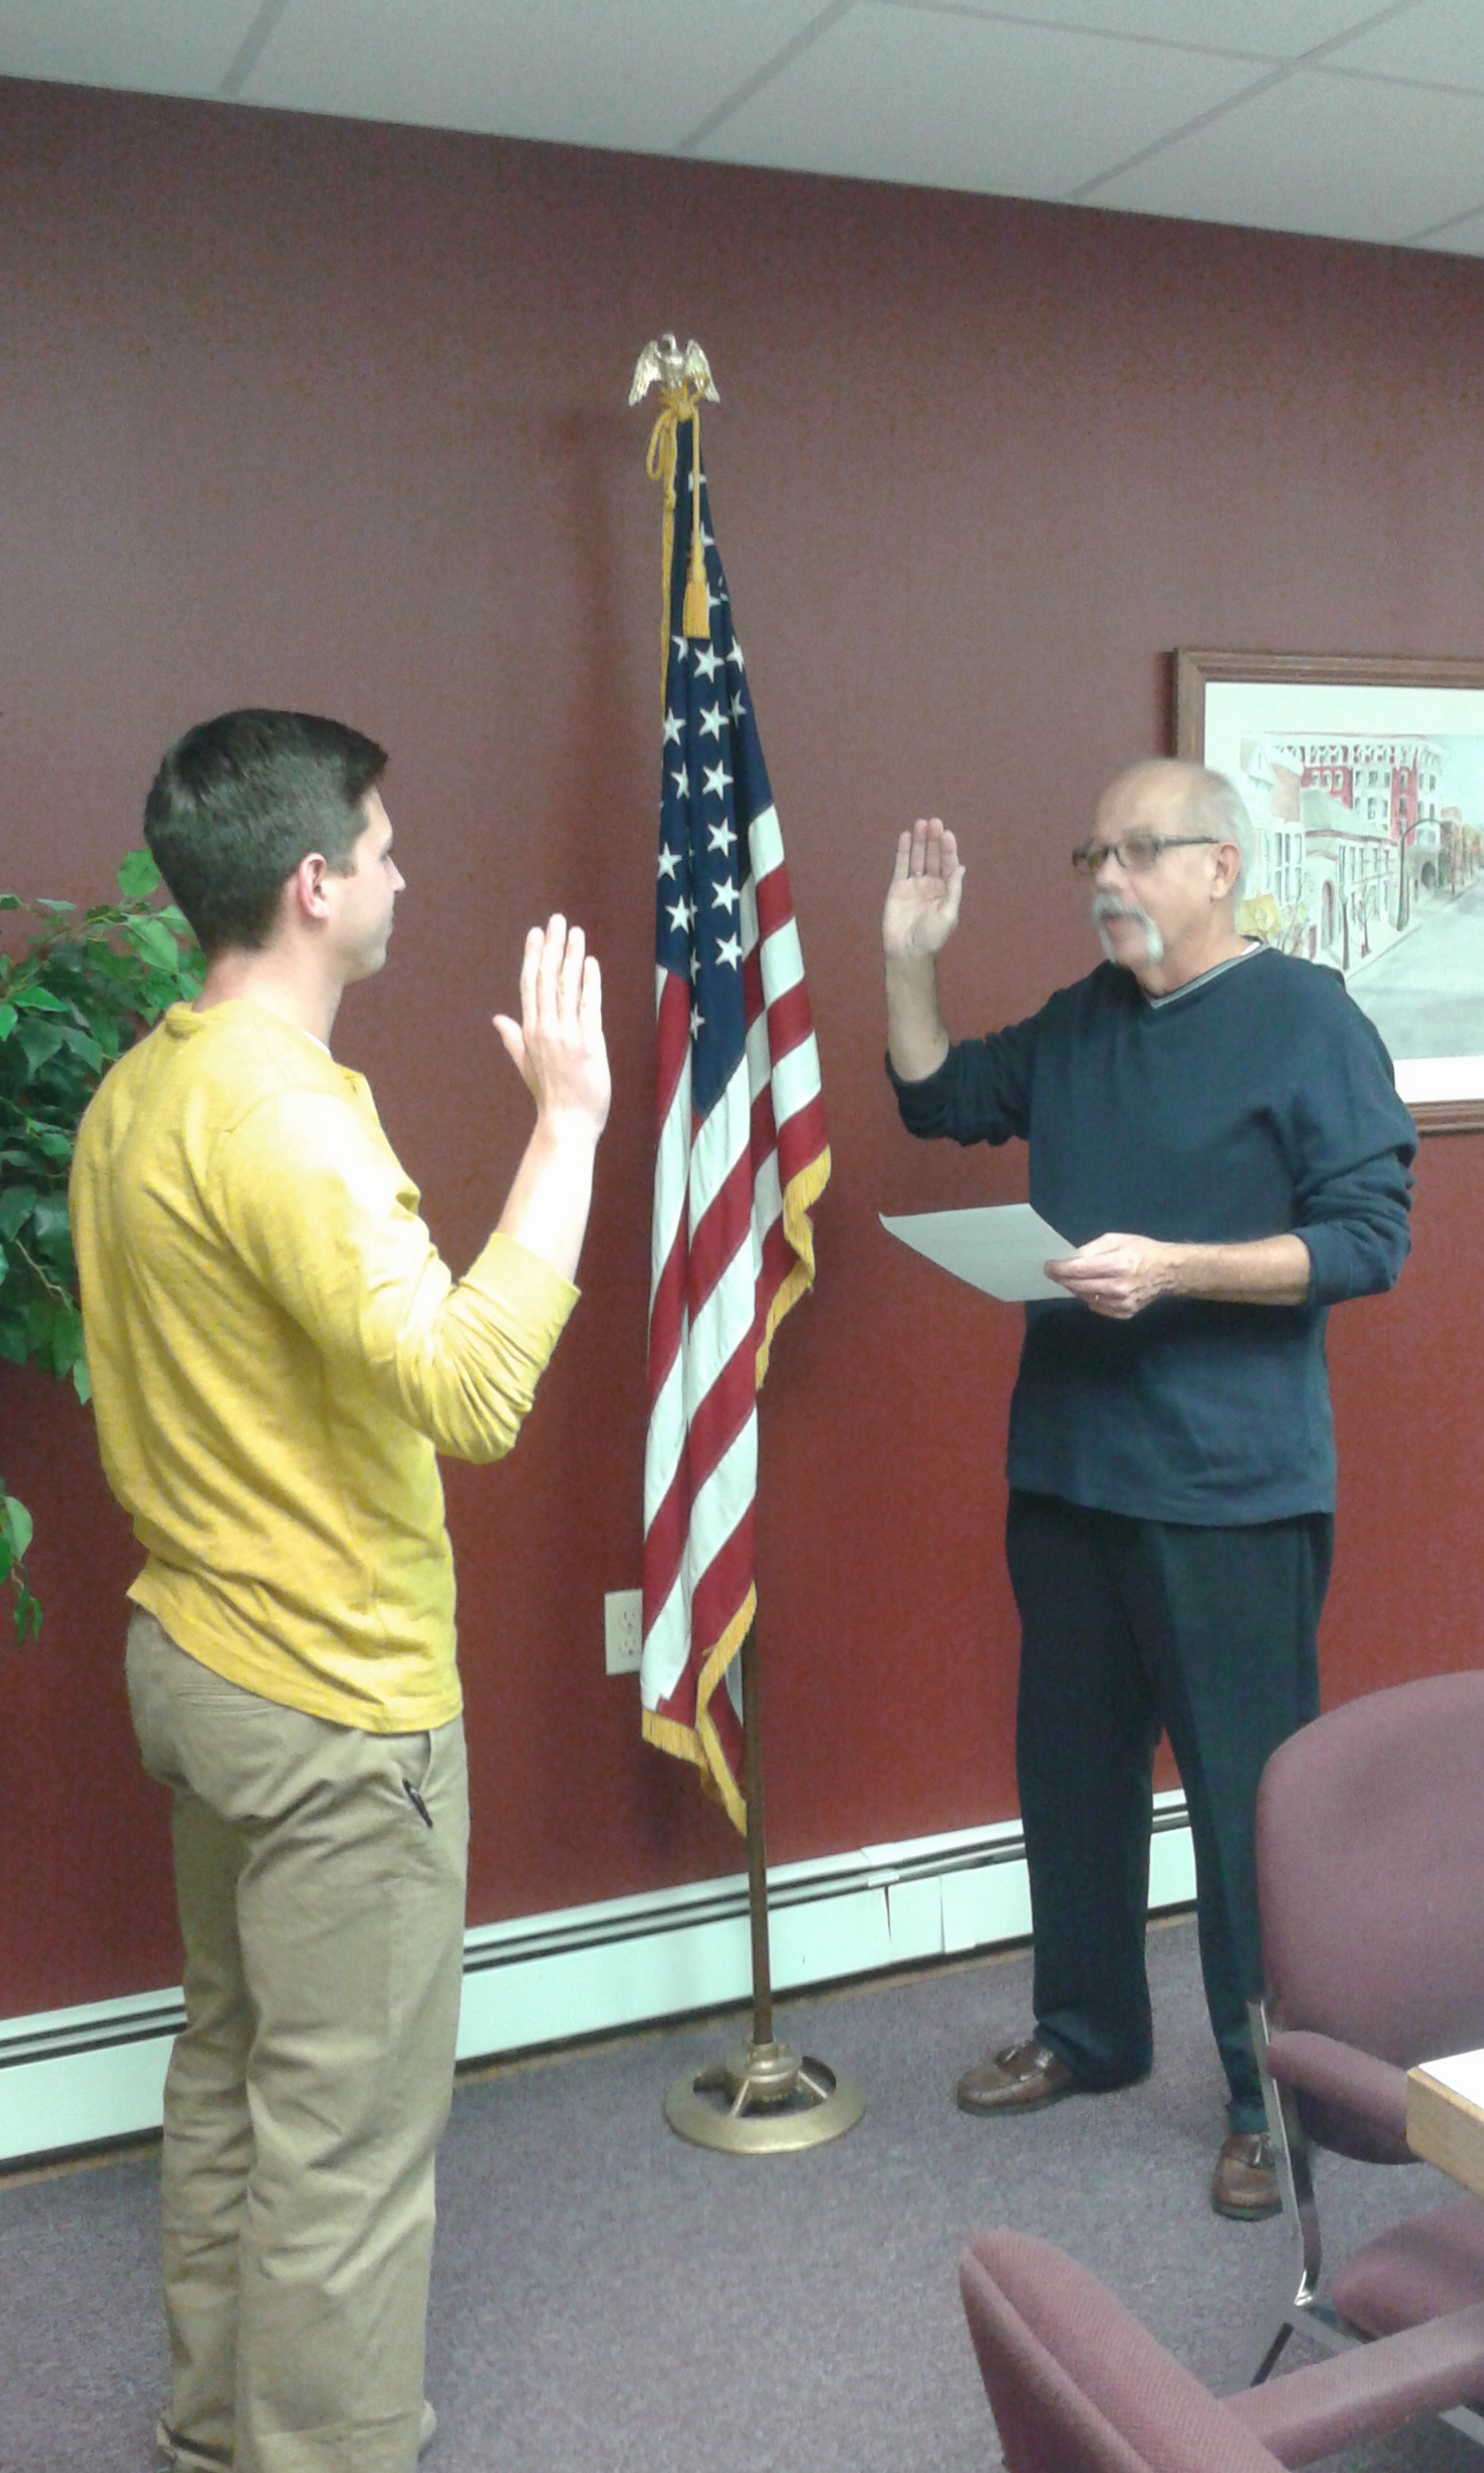 Robbie Tubbs, newly appointed member of the Clearfield Borough Council, takes the oath of office as administered by Major James Schell Thursday at the regular Clearfield Borough Council meeting. Tubbs was appointed to fill the Second Ward council seat which had been vacated following the death of Council member Dave Gallaher in September. (Photo by Kimberly Finnigan)